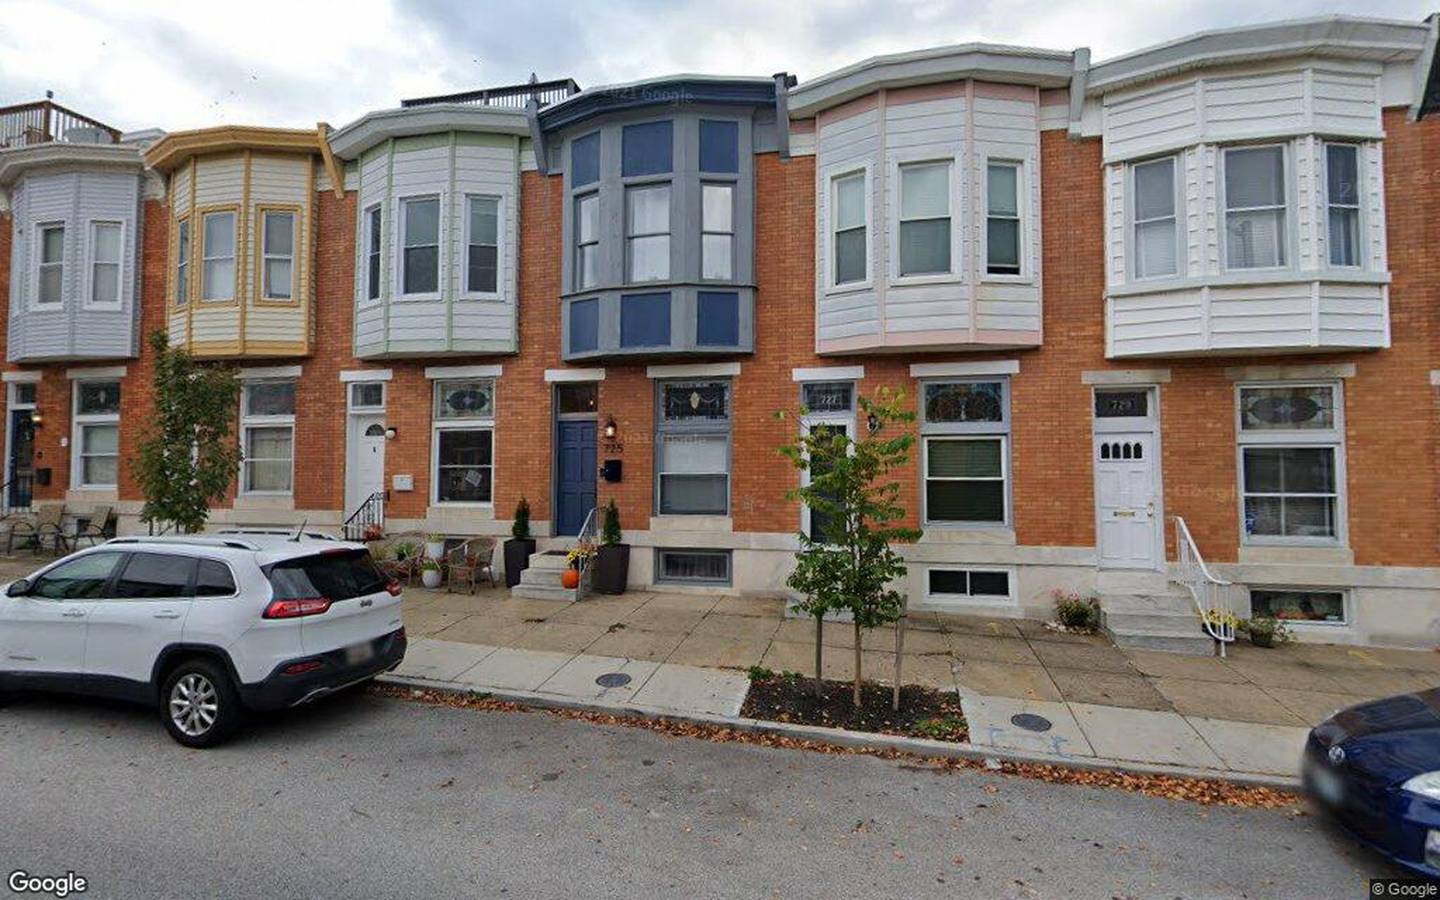 $530,000, townhouse at 725 Linwood Avenue 